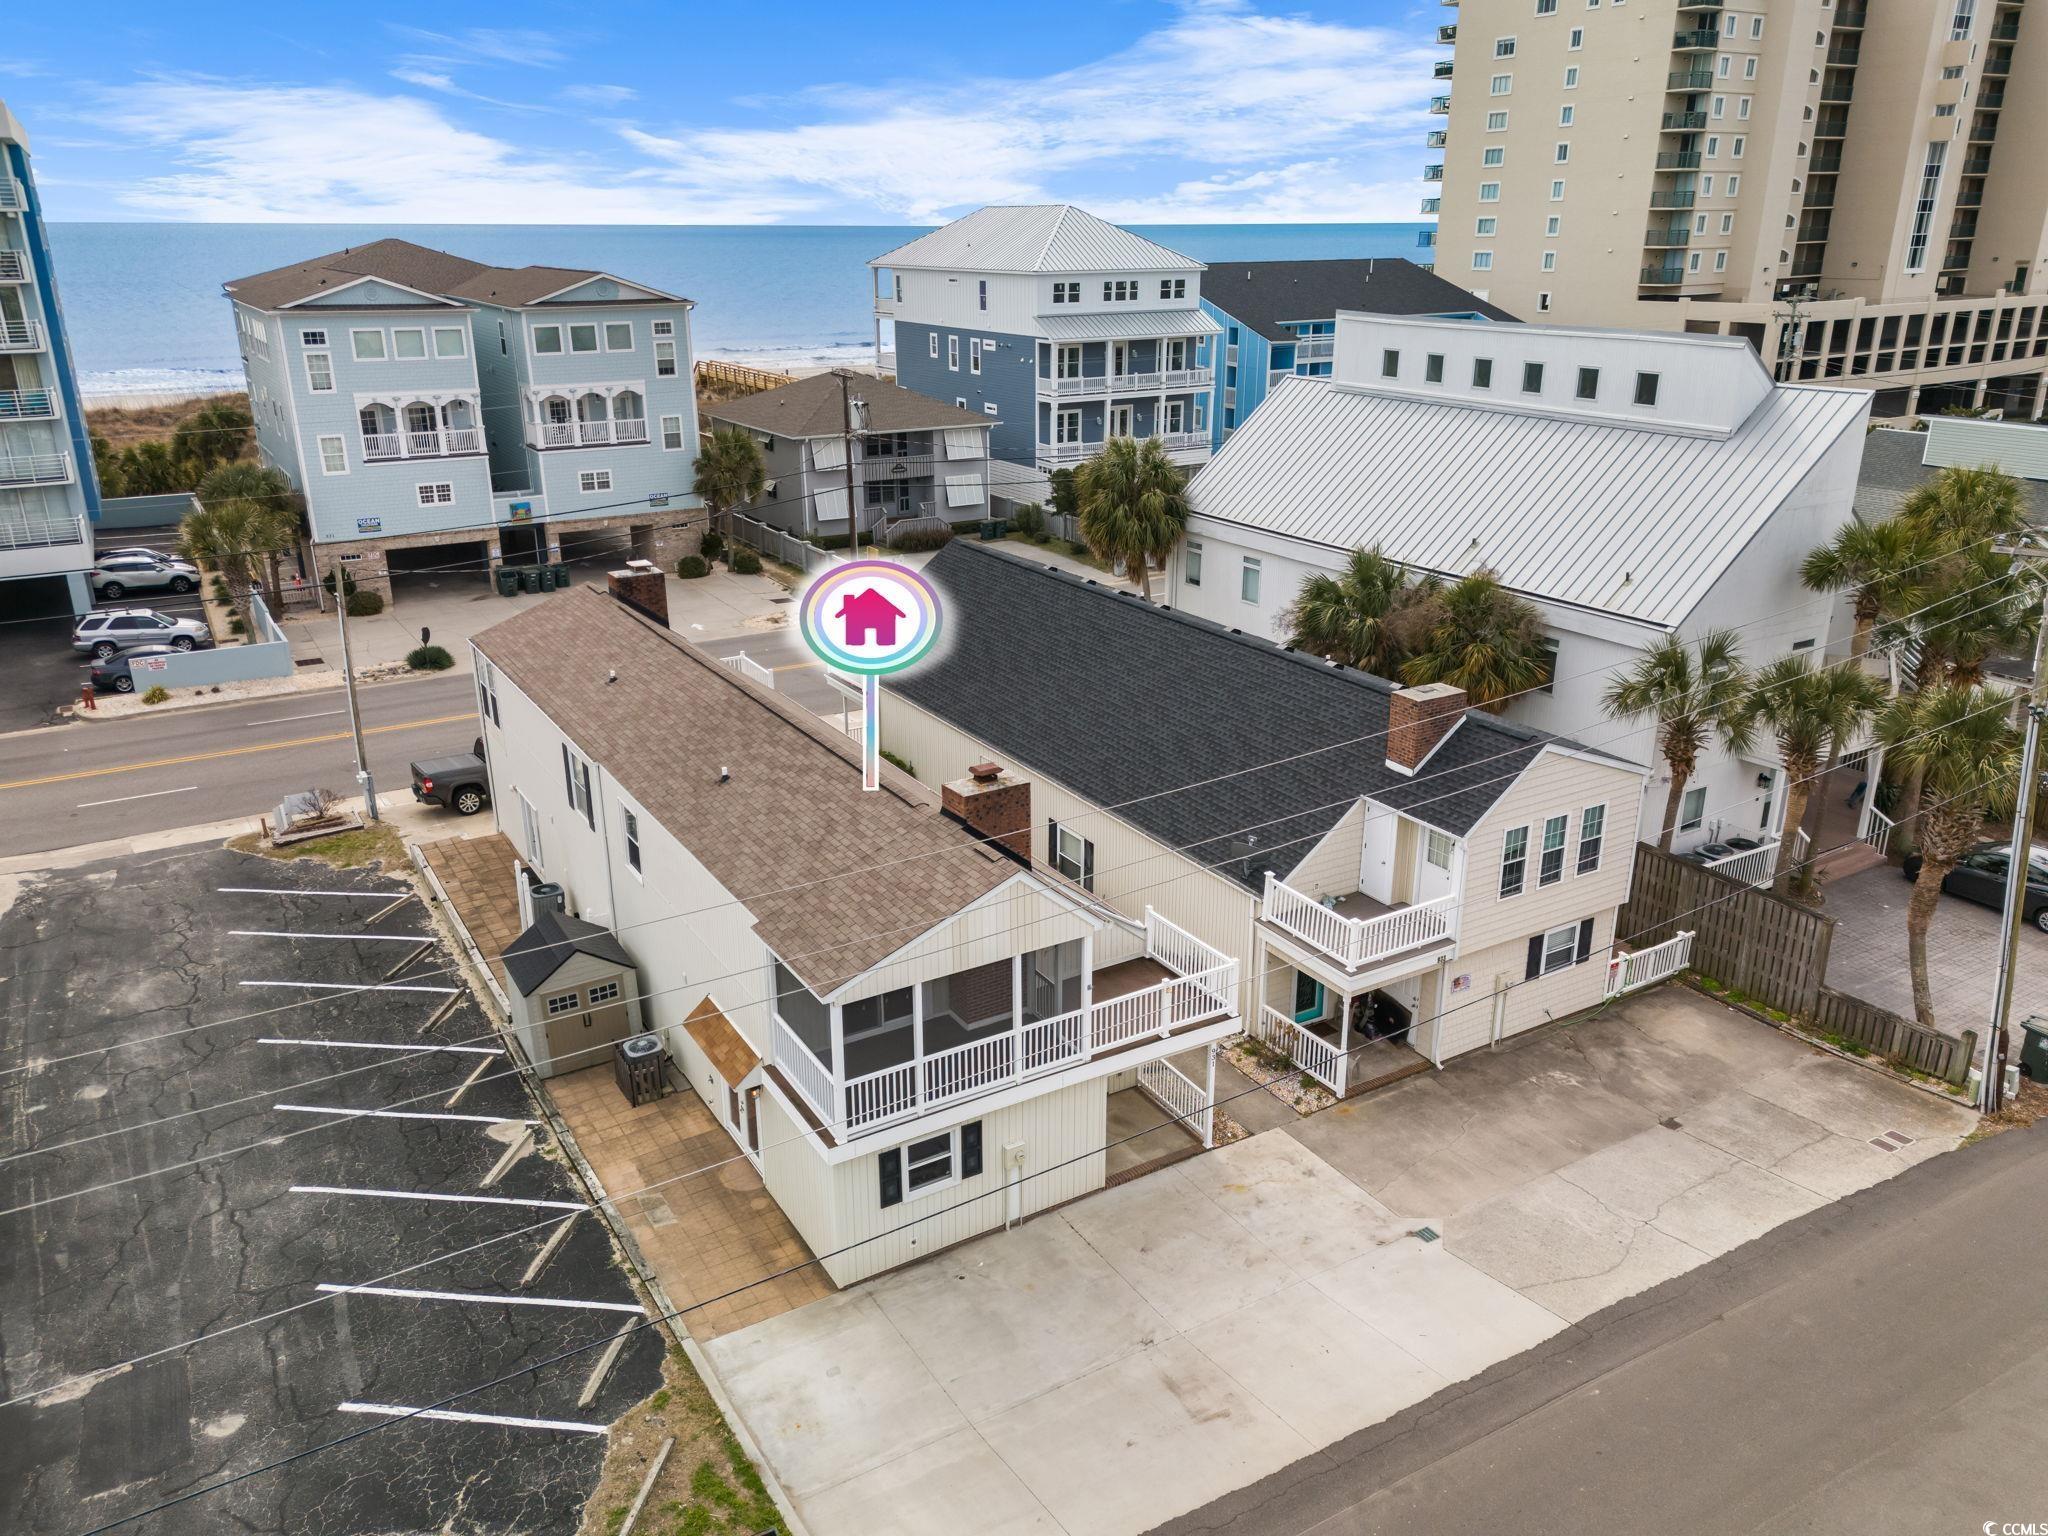 location, location, location! beach living at its finest! this north myrtle beach oasis is footsteps away from having your toes in the sand! whether you’re looking for the ultimate vacation getaway or want to get ready for the upcoming rental season, this move-in ready home only a block from the beach has it all! boasting a large owner’s suite on the 1st with dual vanity bathroom and walk-in closet. the family room has a wood burning fireplace with easy access to the kitchen featuring granite counter tops and stainless steel appliances. upstairs you’ll find two spacious bedrooms with a 2nd full bath and access to the relaxing screened-in porch with deck! you’ll find plenty of storage for all of your beach toys with both your attached storage room and detached shed! with the large parking area, you’ll be able to accommodate all your friends and family! beach access directly across the street!